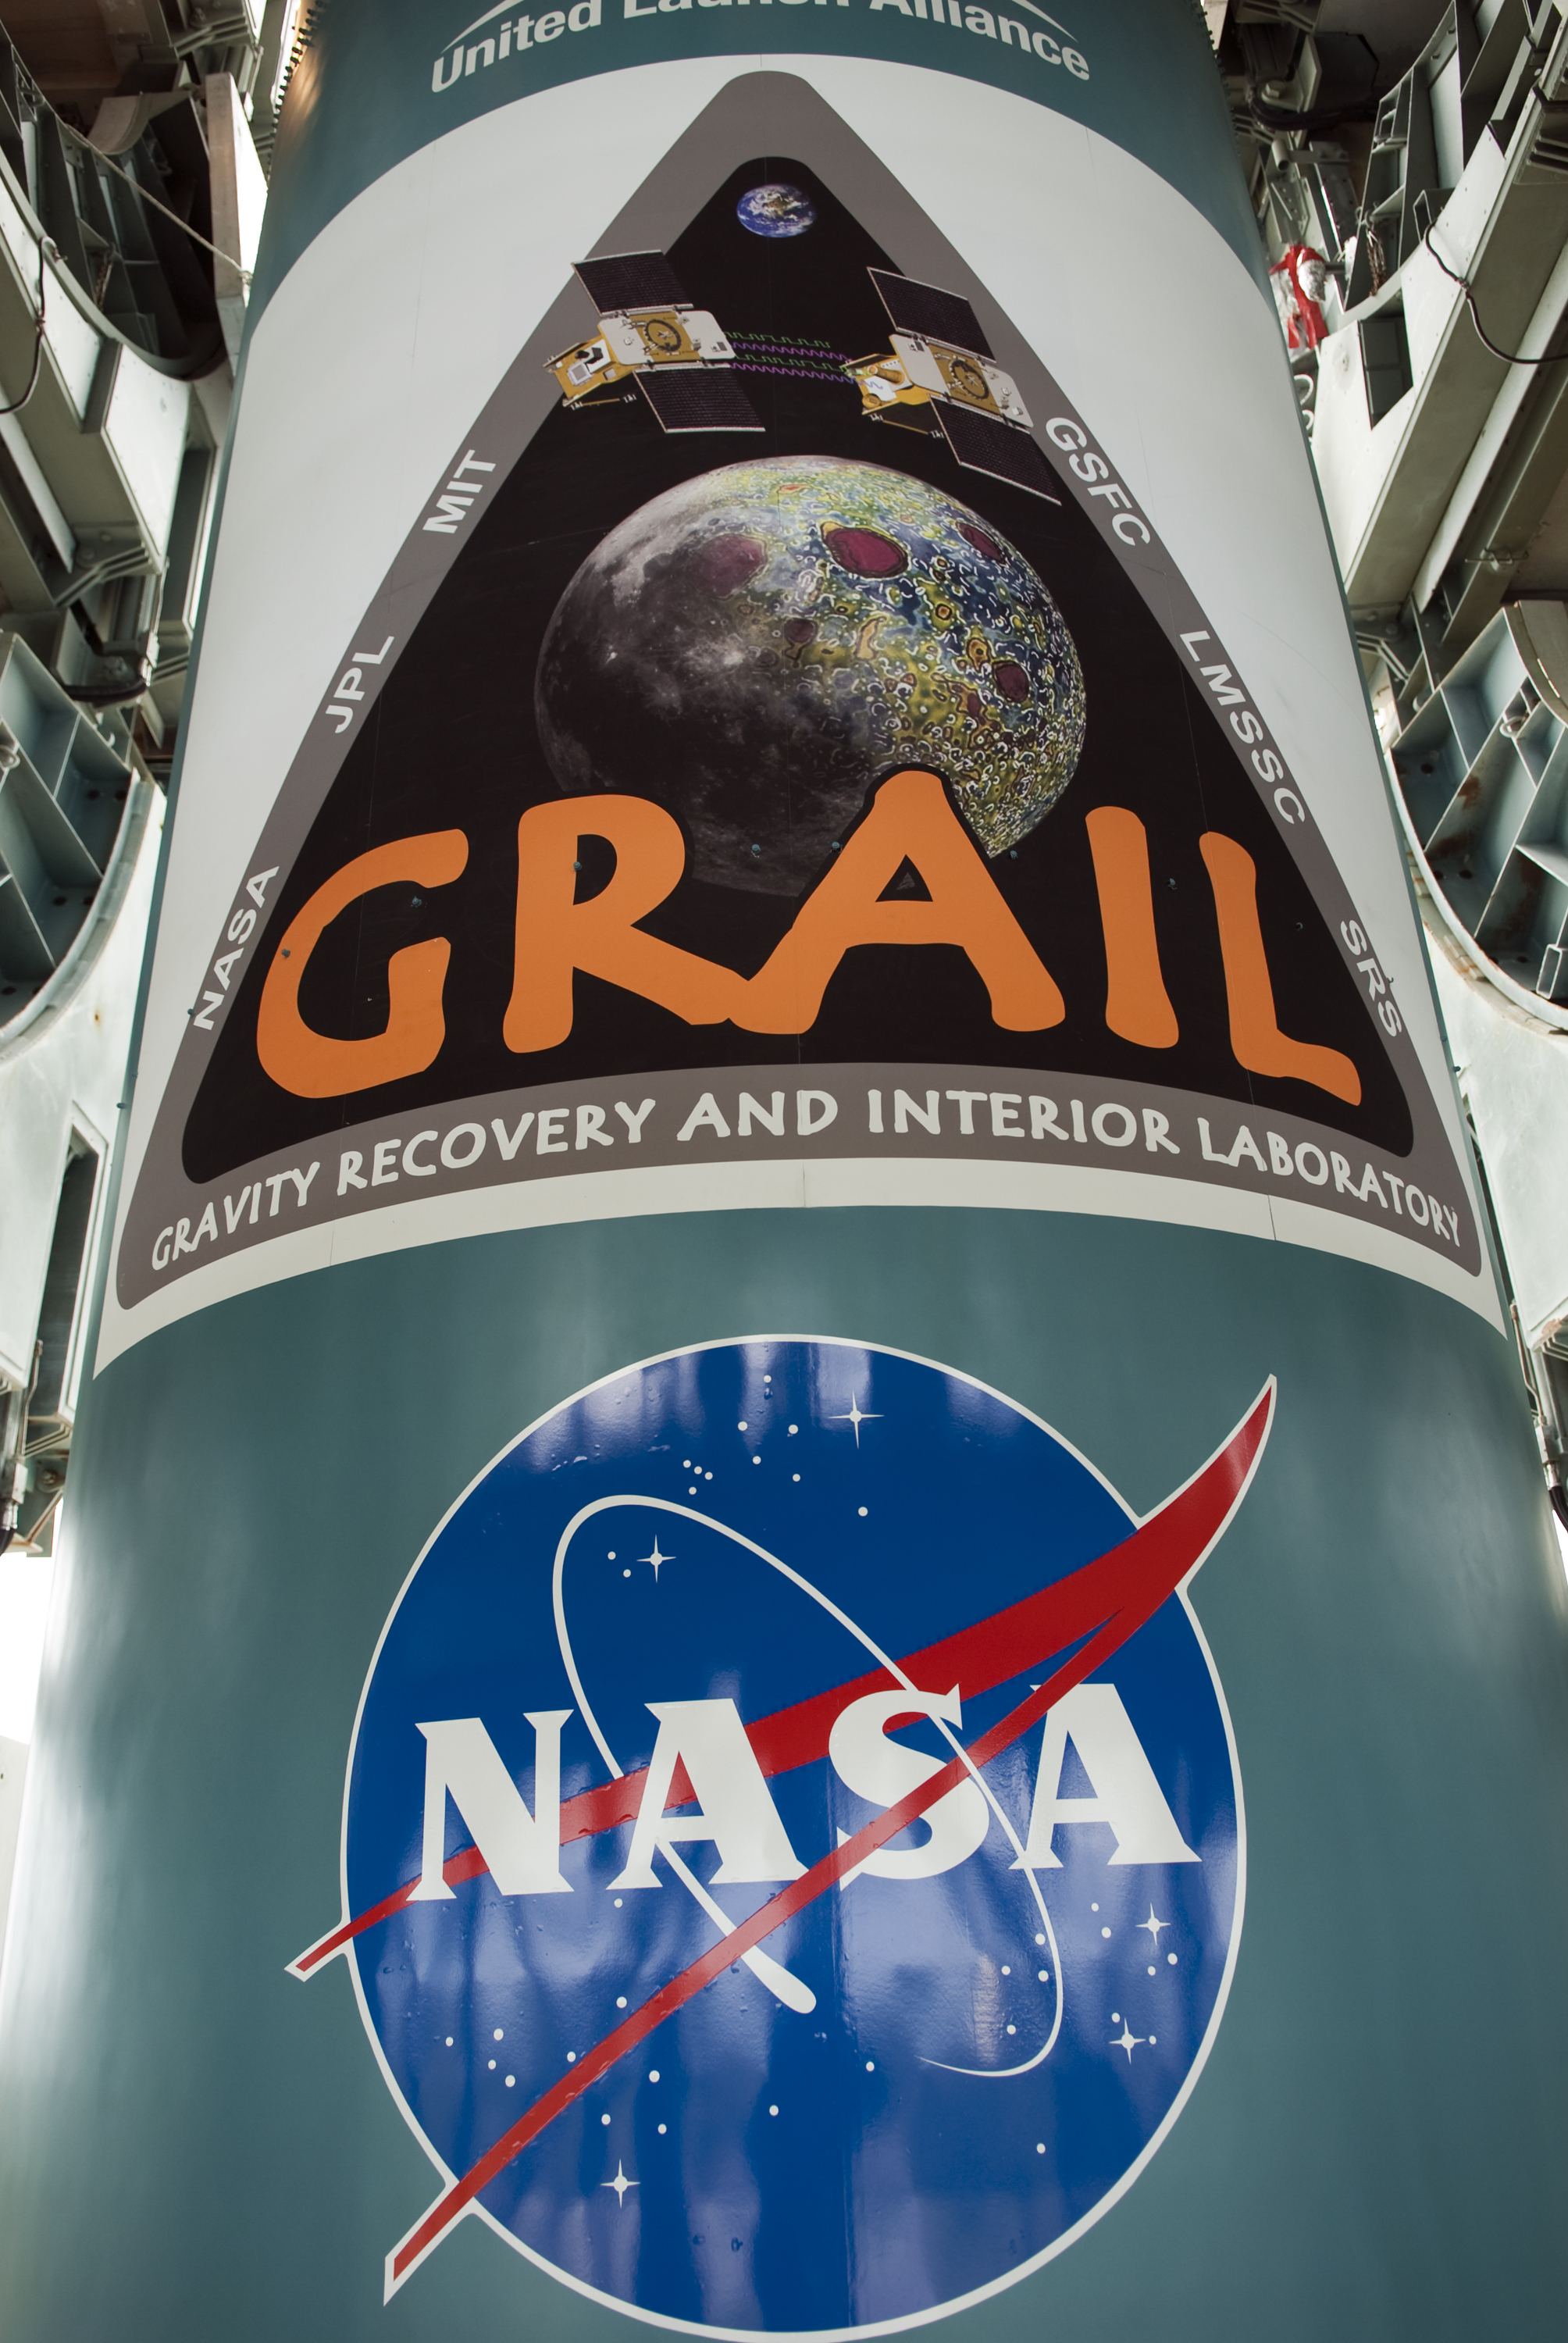 GRAIL mission logo on the first stage of the Delta II rocket